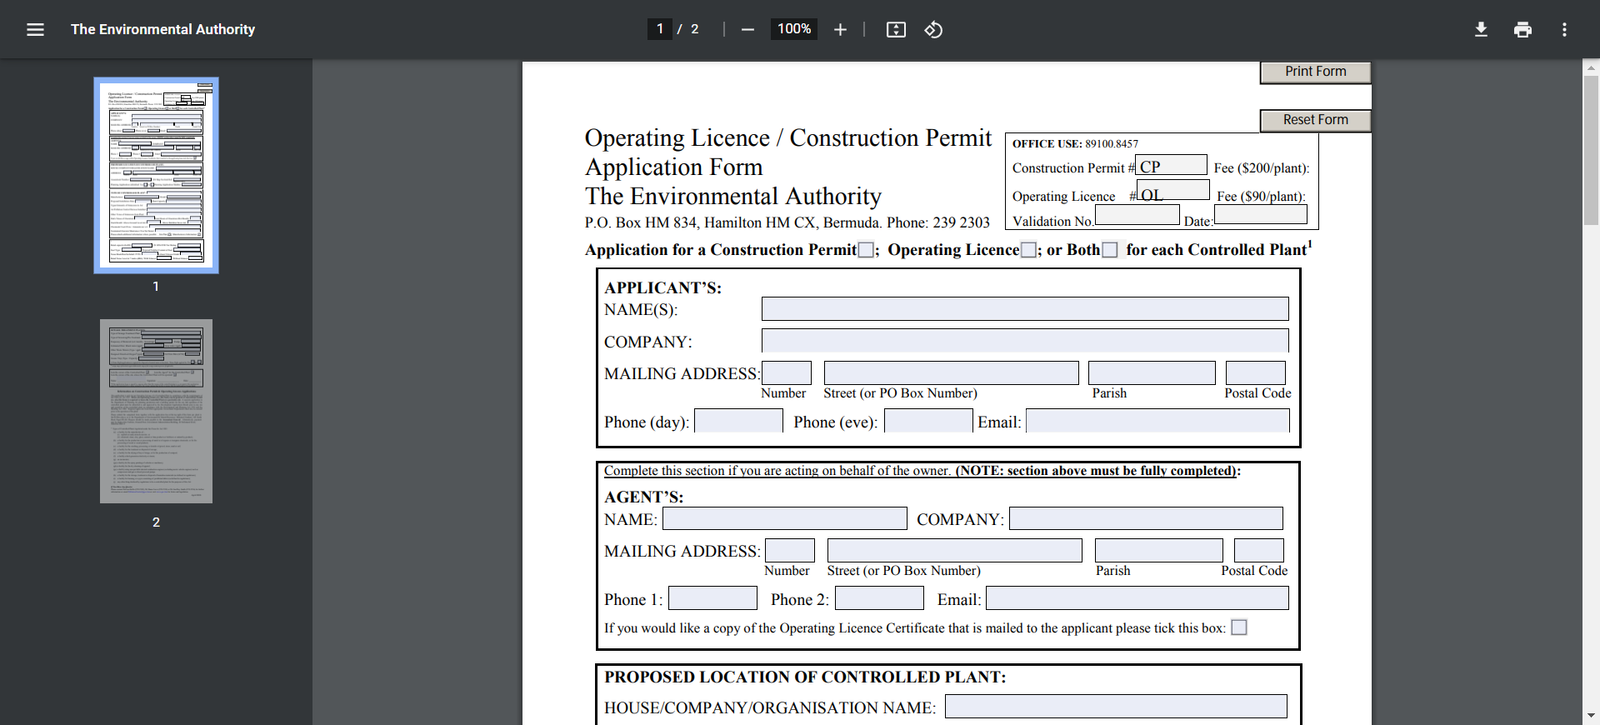 How to Apply for Construction Permit and Operating License In Bermuda